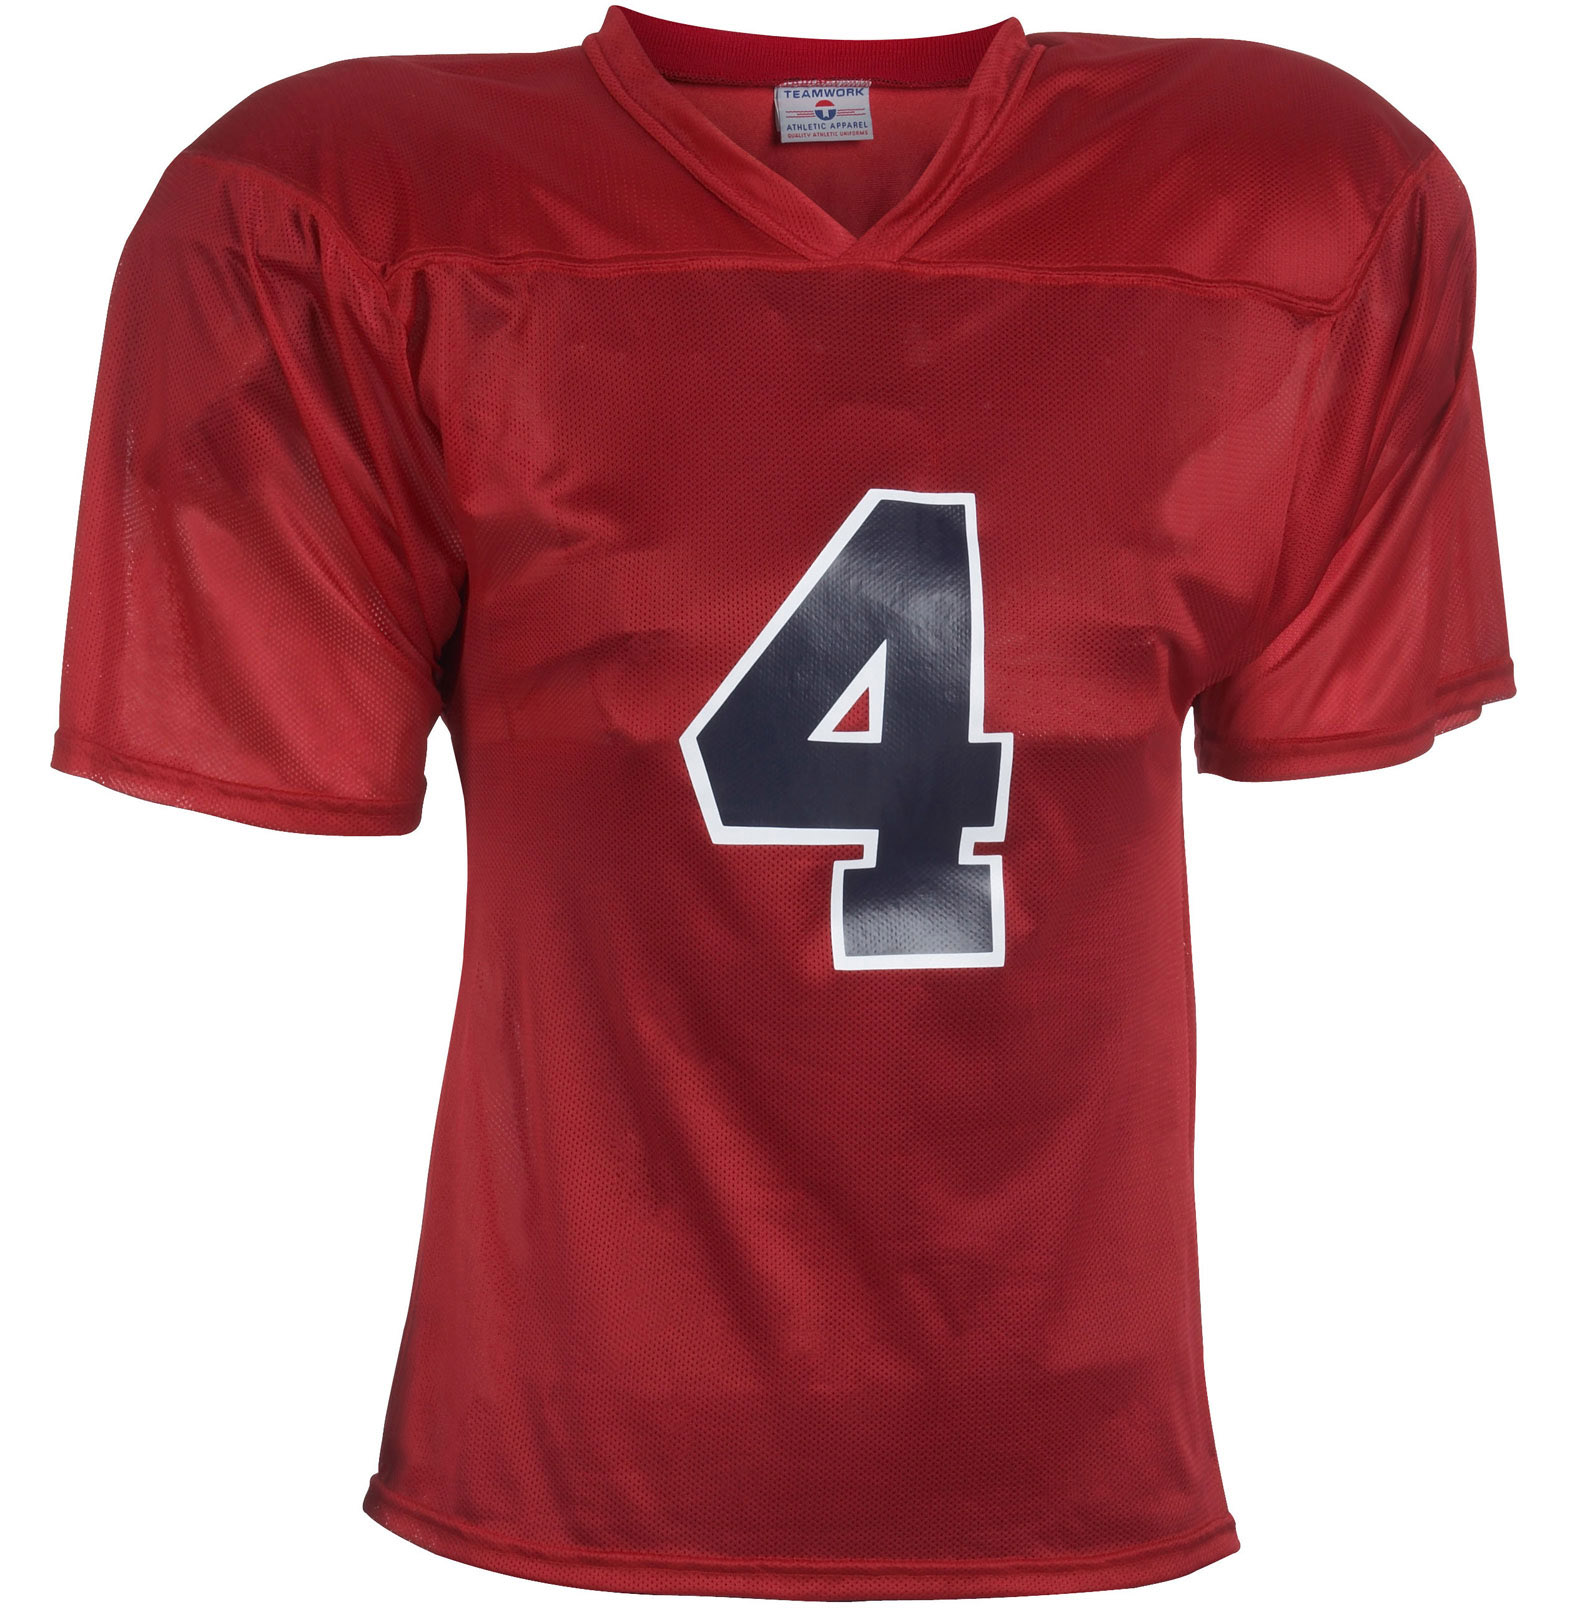 Football jersey blowup cropped clip art